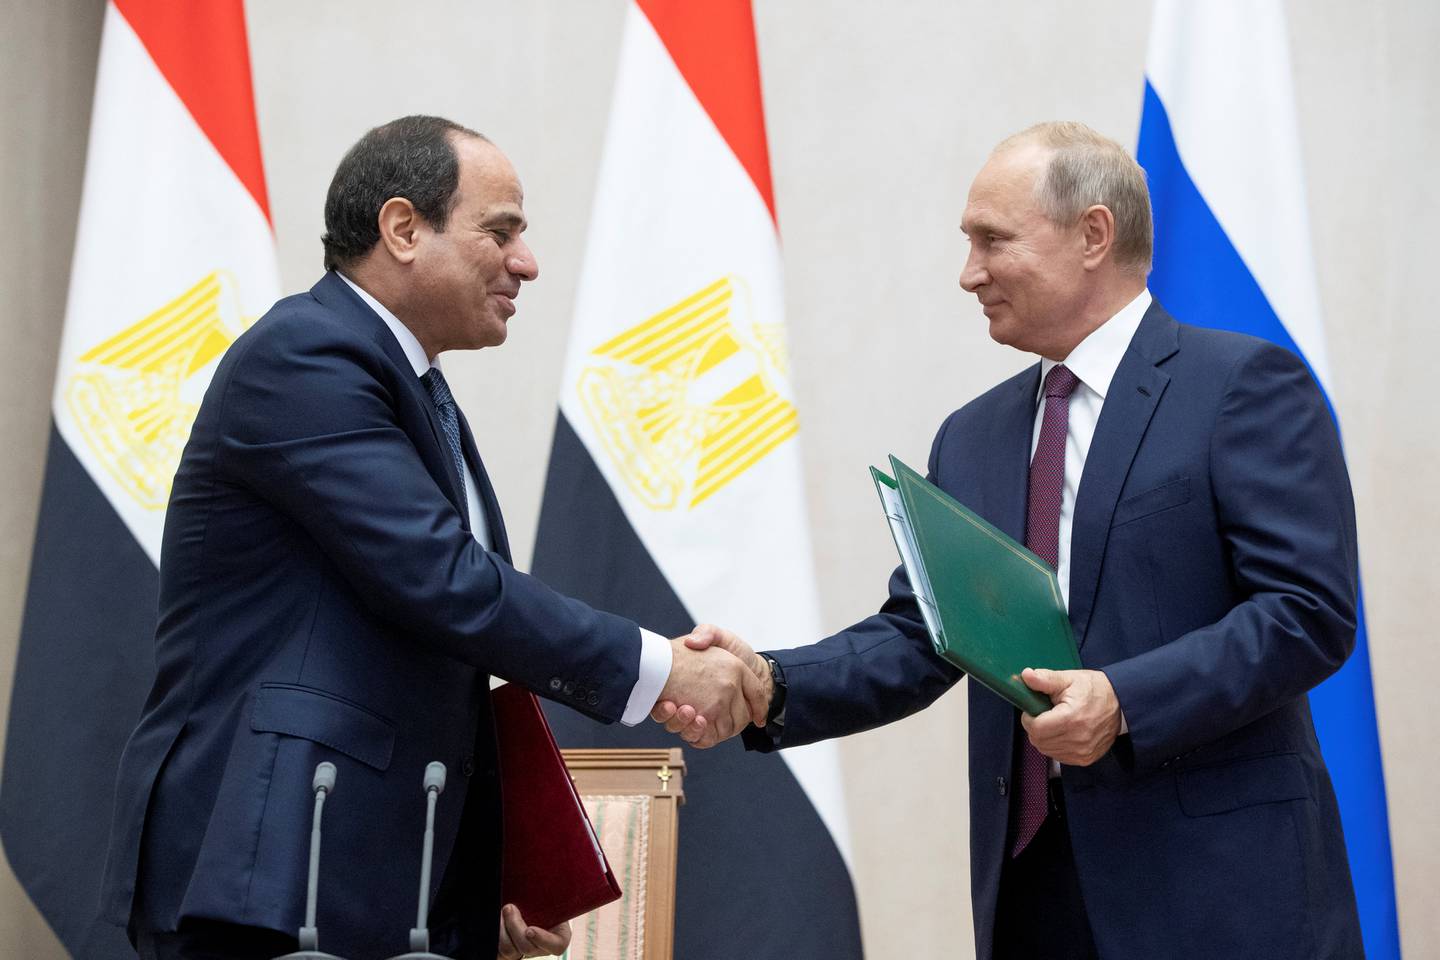 Russian President Vladimir Putin and Egyptian President Abdel Fattah al-Sisi shake hands during a signing ceremony following their meeting in the Black Sea resort of Sochi, Russia October 17, 2018. Pavel Golovkin/Pool via REUTERS